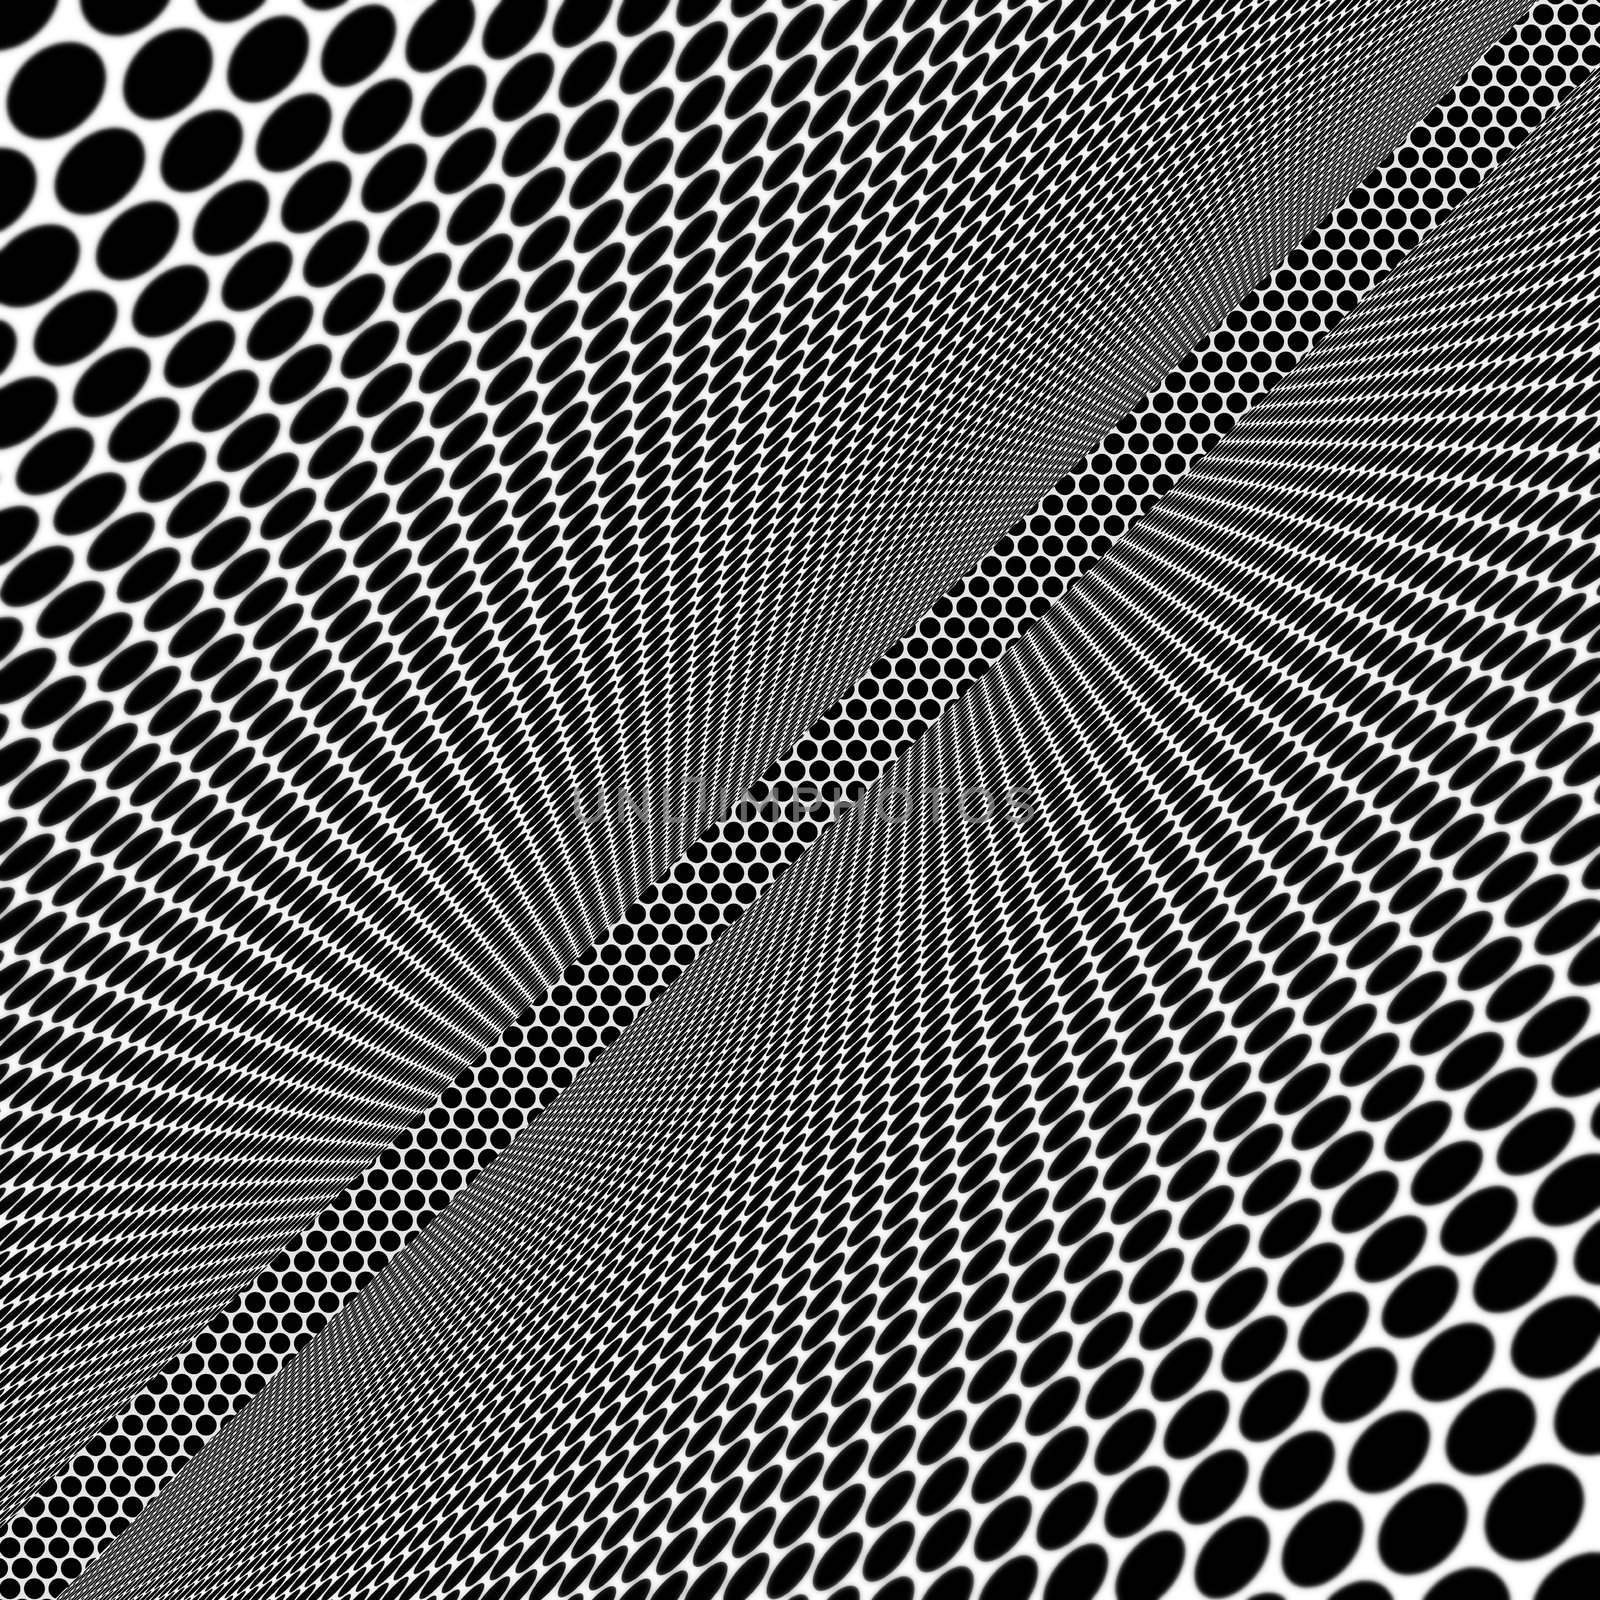 Abstract geometrical monochrome square background by pzaxe